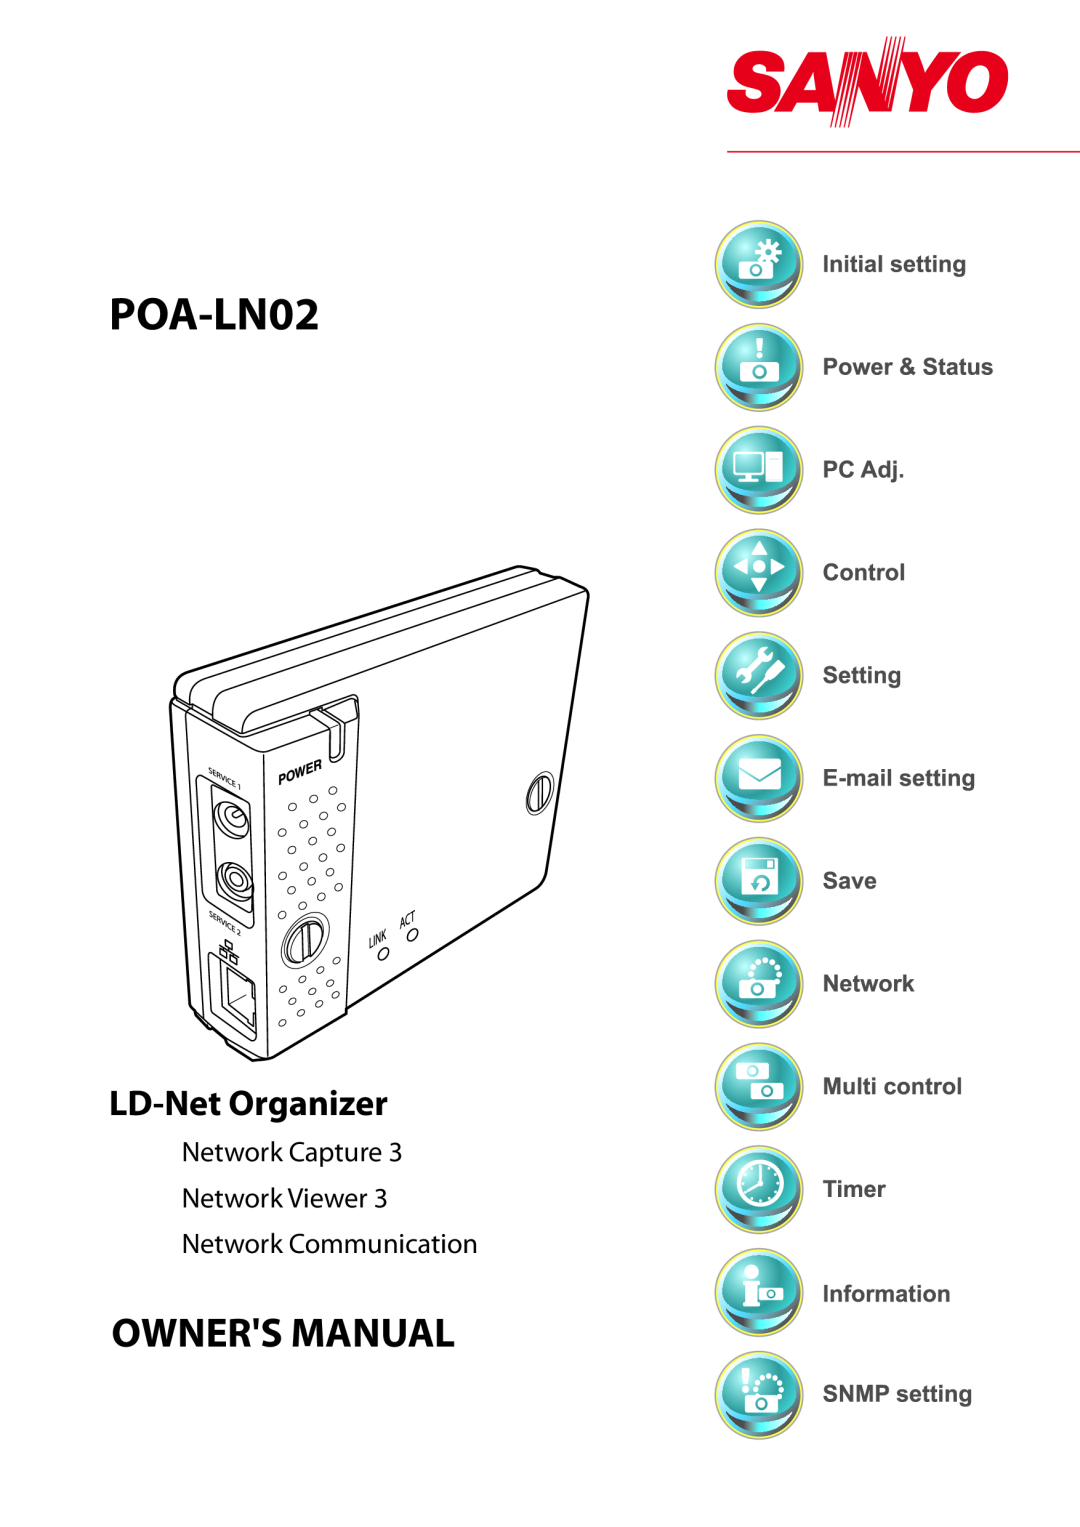 Sanyo POA-LN02 owner manual LD-Net Organizer, Owners Manual, Network Capture Network Viewer Network Communication 